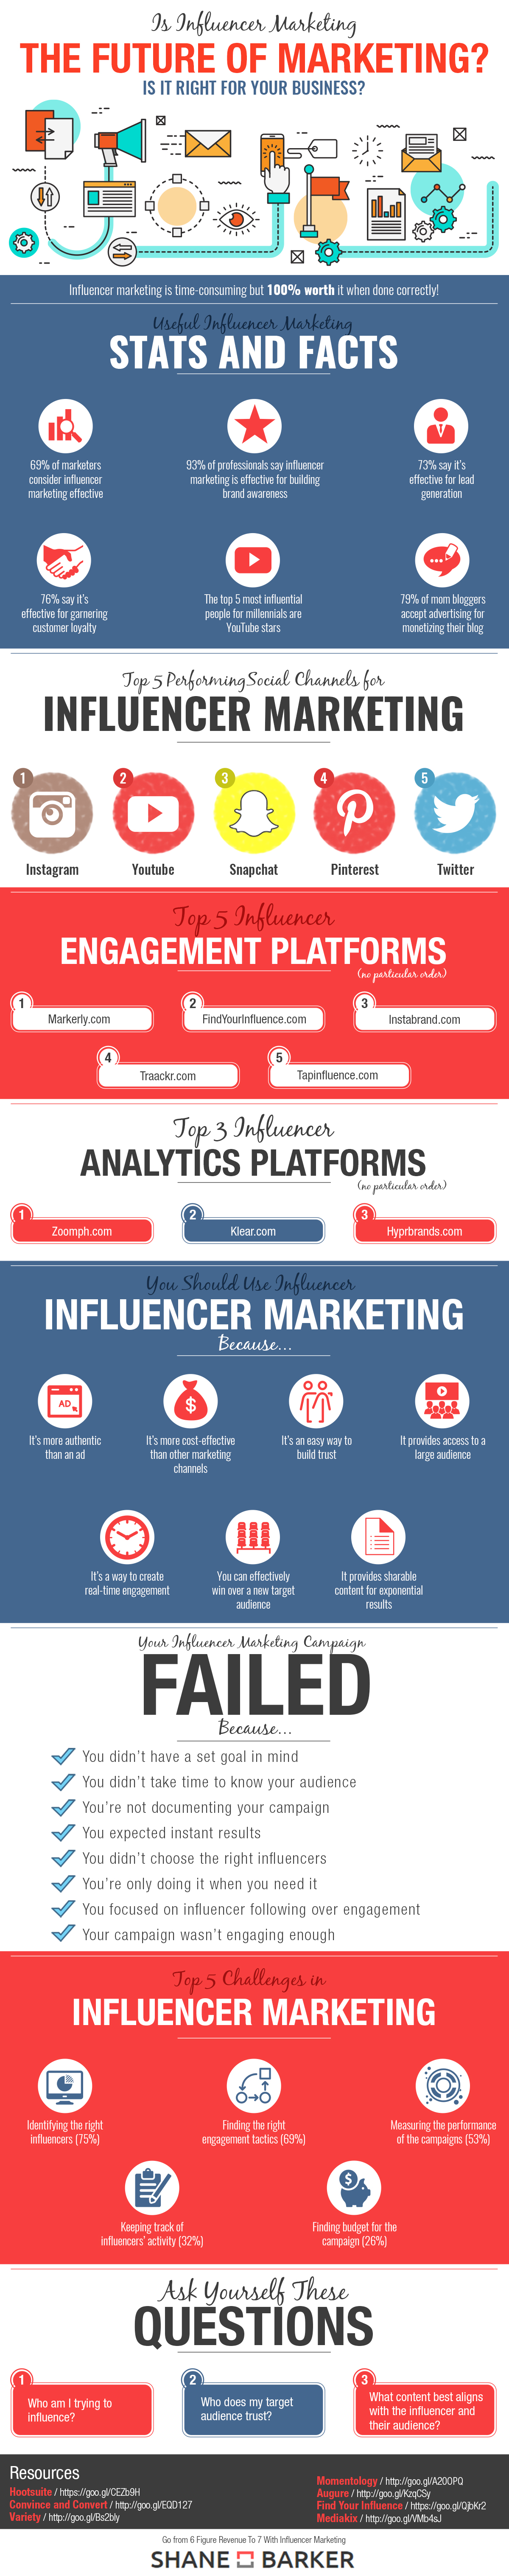 What Will The Future Of Influencer Marketing Look Like? (Infographic)